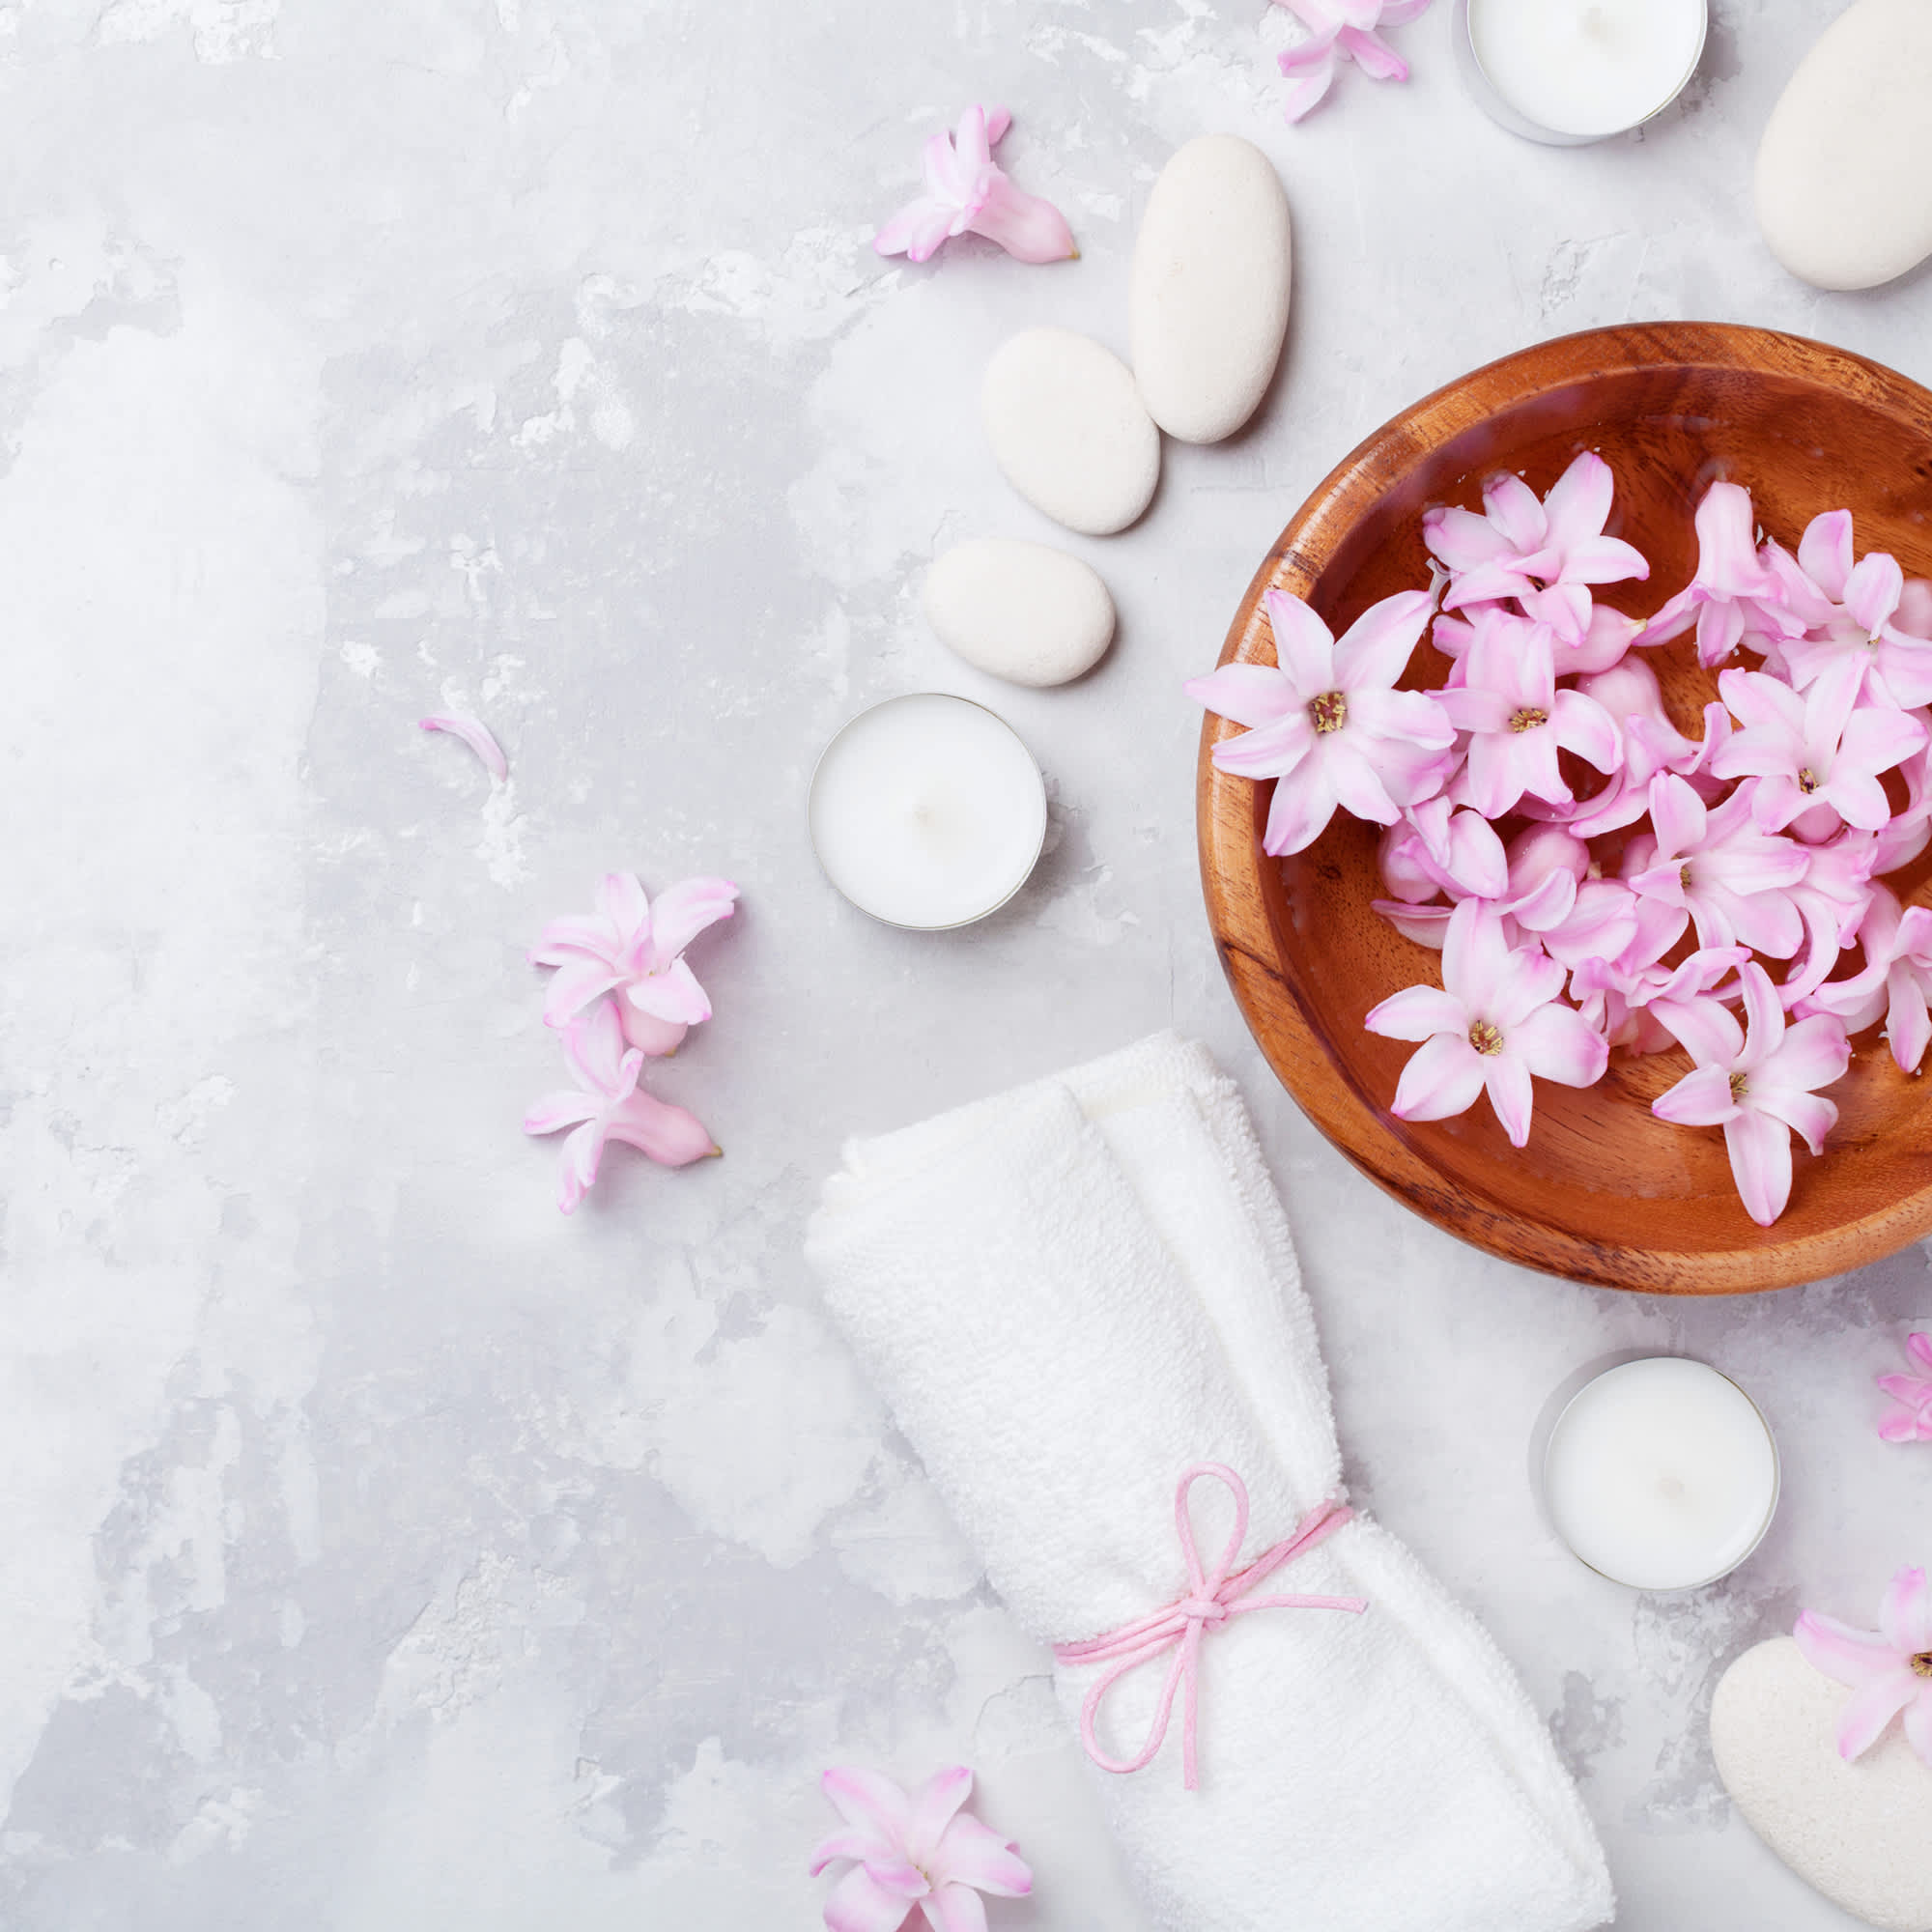 Explore the best beauty and wellness experiences London has to offer! Indulge in a range of pampering experiences, including revitalising spas, holistic retreats, and top-rated salons. Ready to feel relaxed and rejuvenated? Go on, treat yourself… you deserve it!